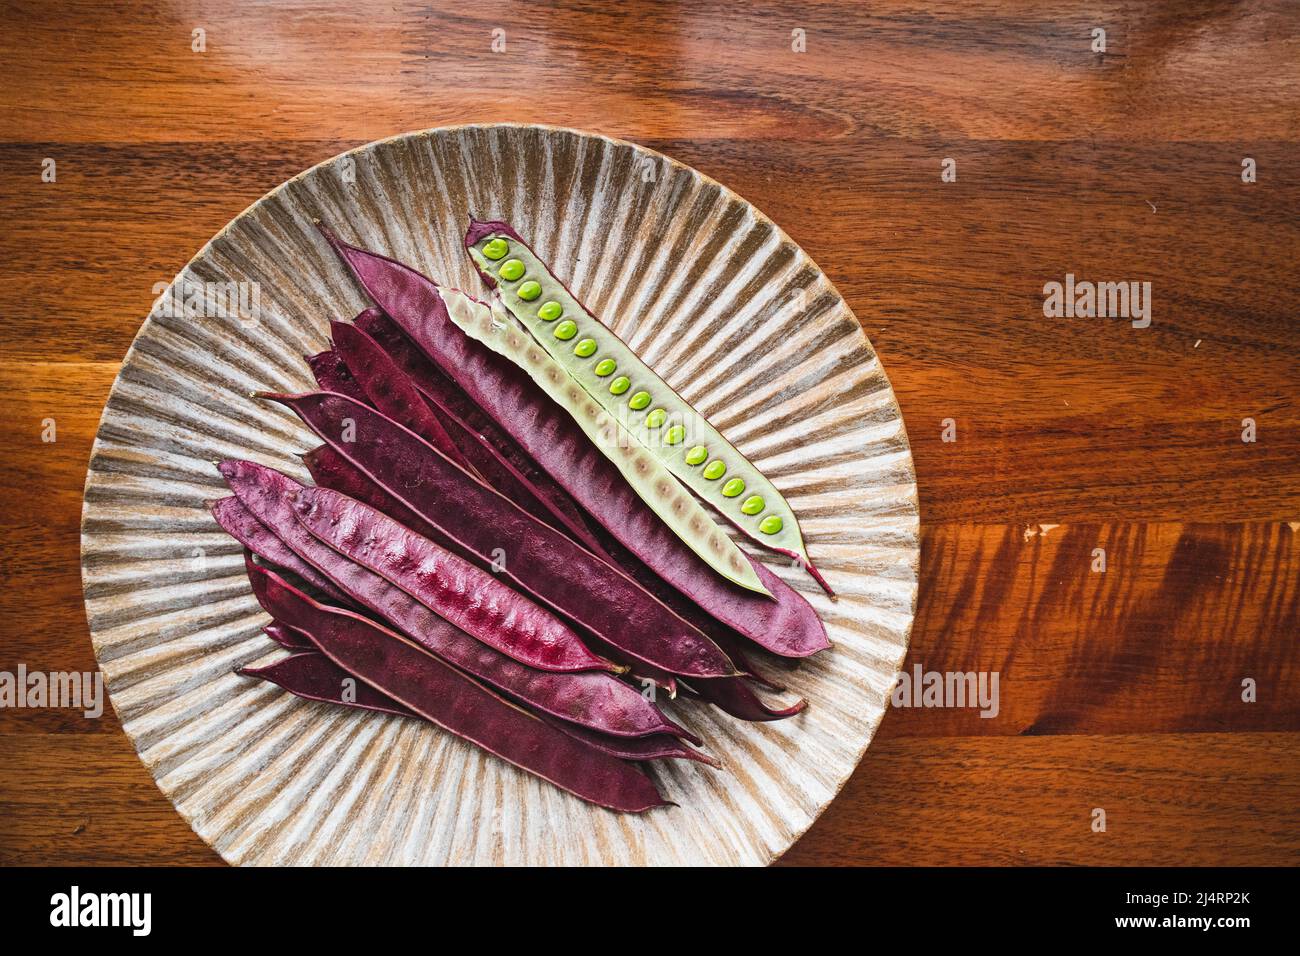 Pile of Guaje seed pods on a plate in Oaxaca, Mexico Stock Photo